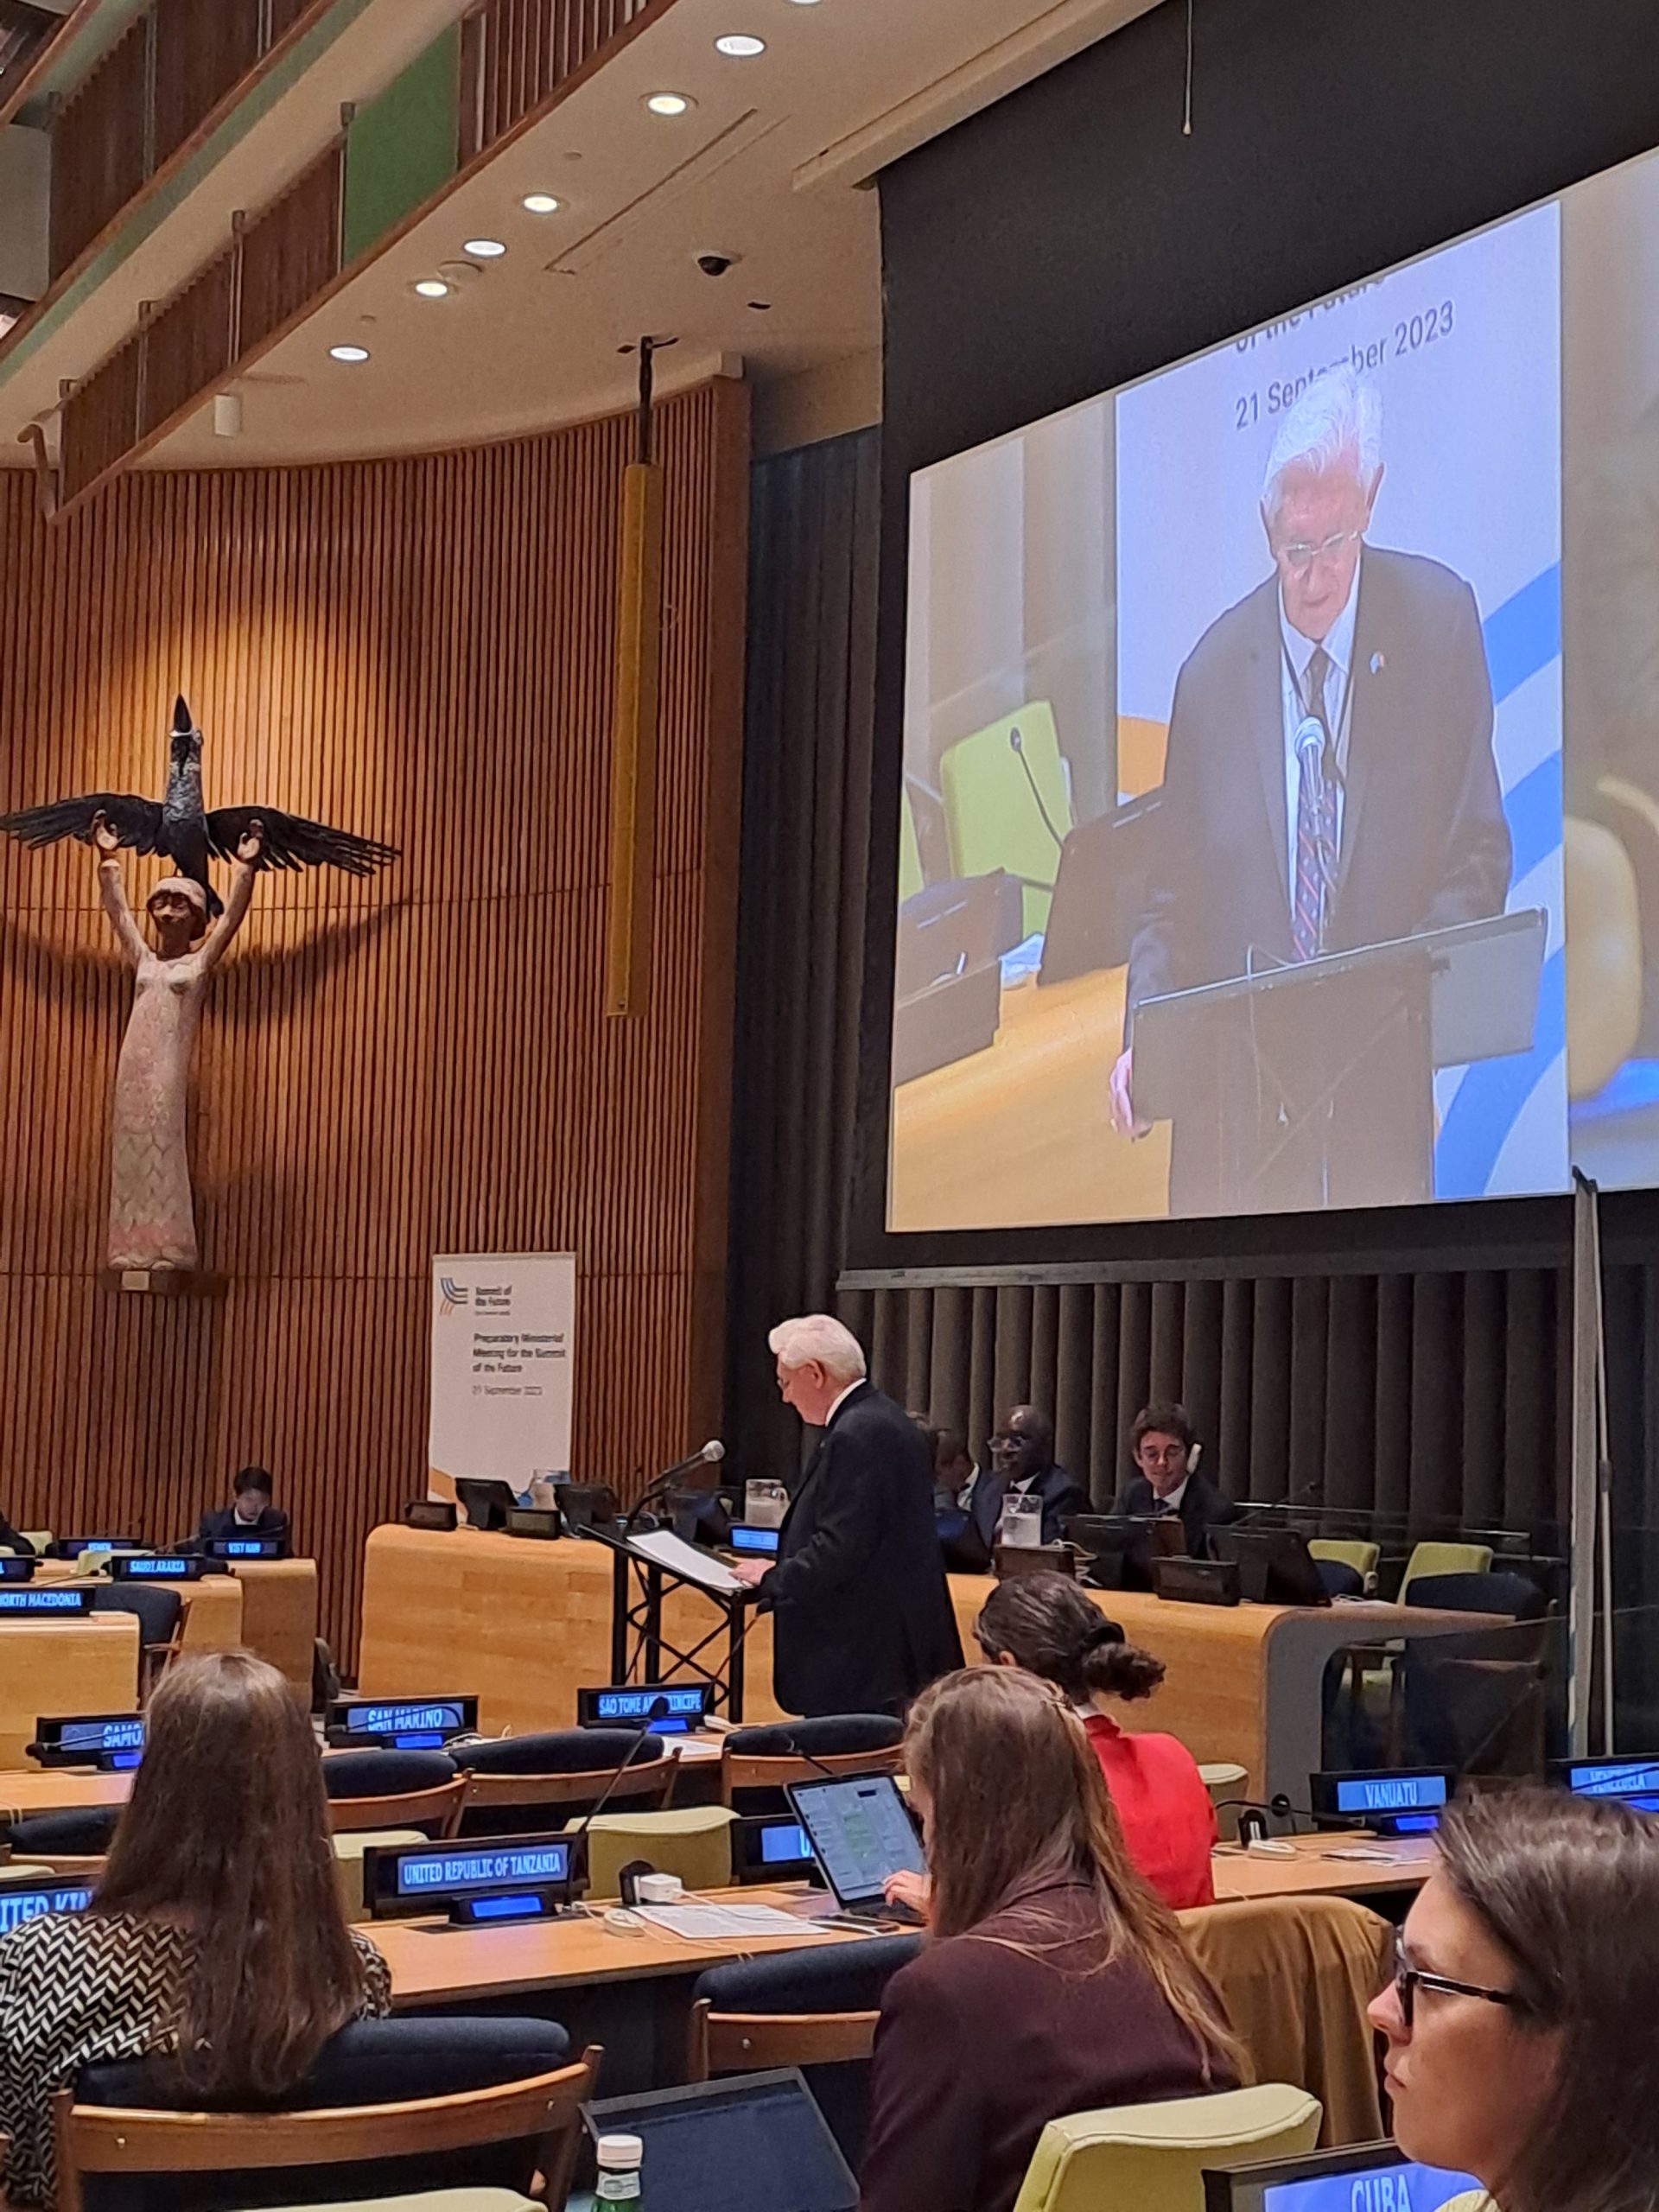 Ambassador Dr. Paul Beresford-Hill addresses the Trusteeship Council during the Summit of the Future 2023.